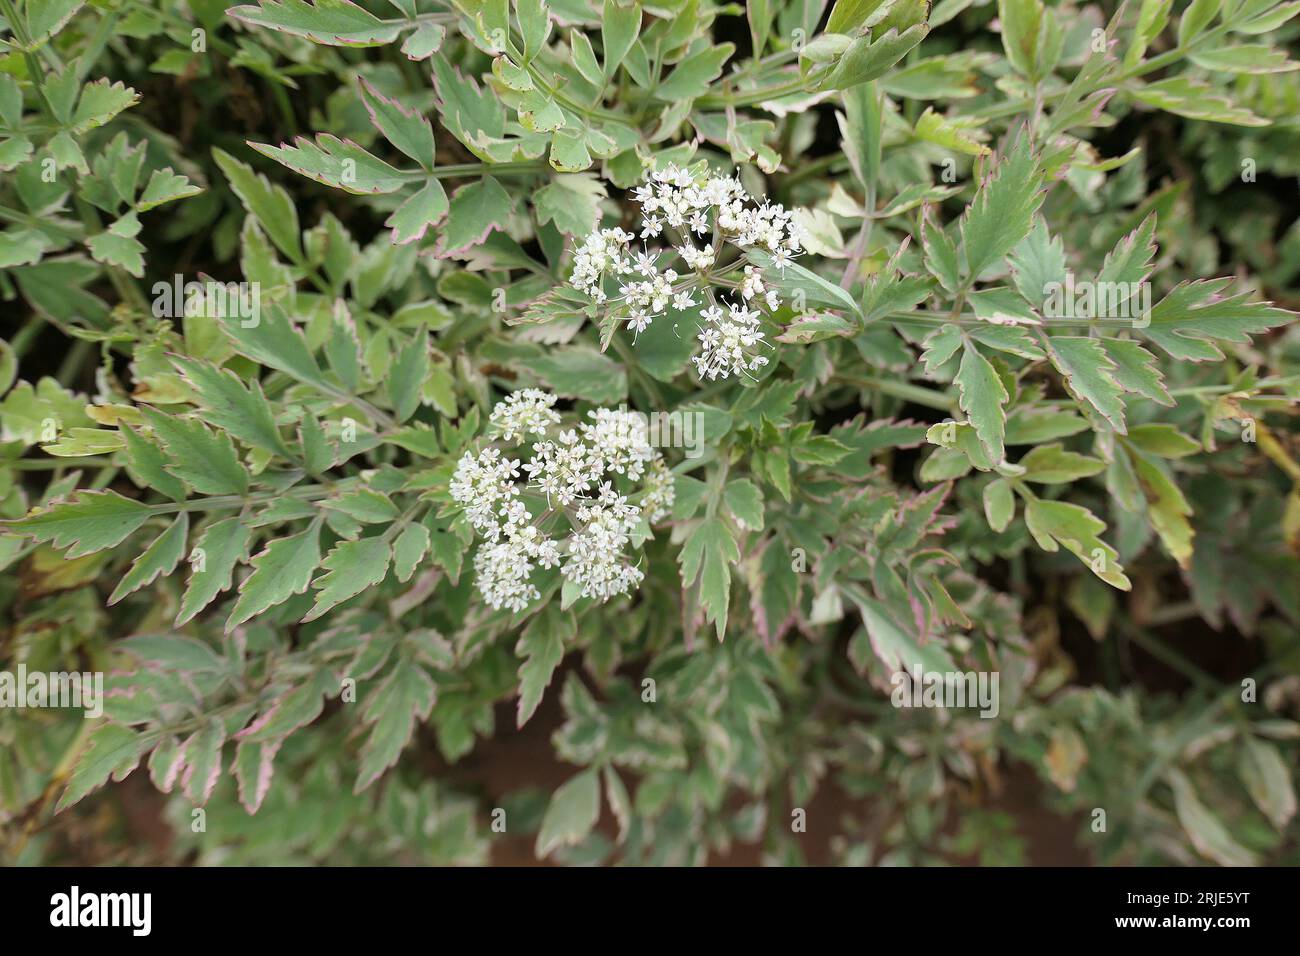 Closeup of the variegated leaves and white flowers of the perennial garden herb oenanthe javanica flamingo. Stock Photo